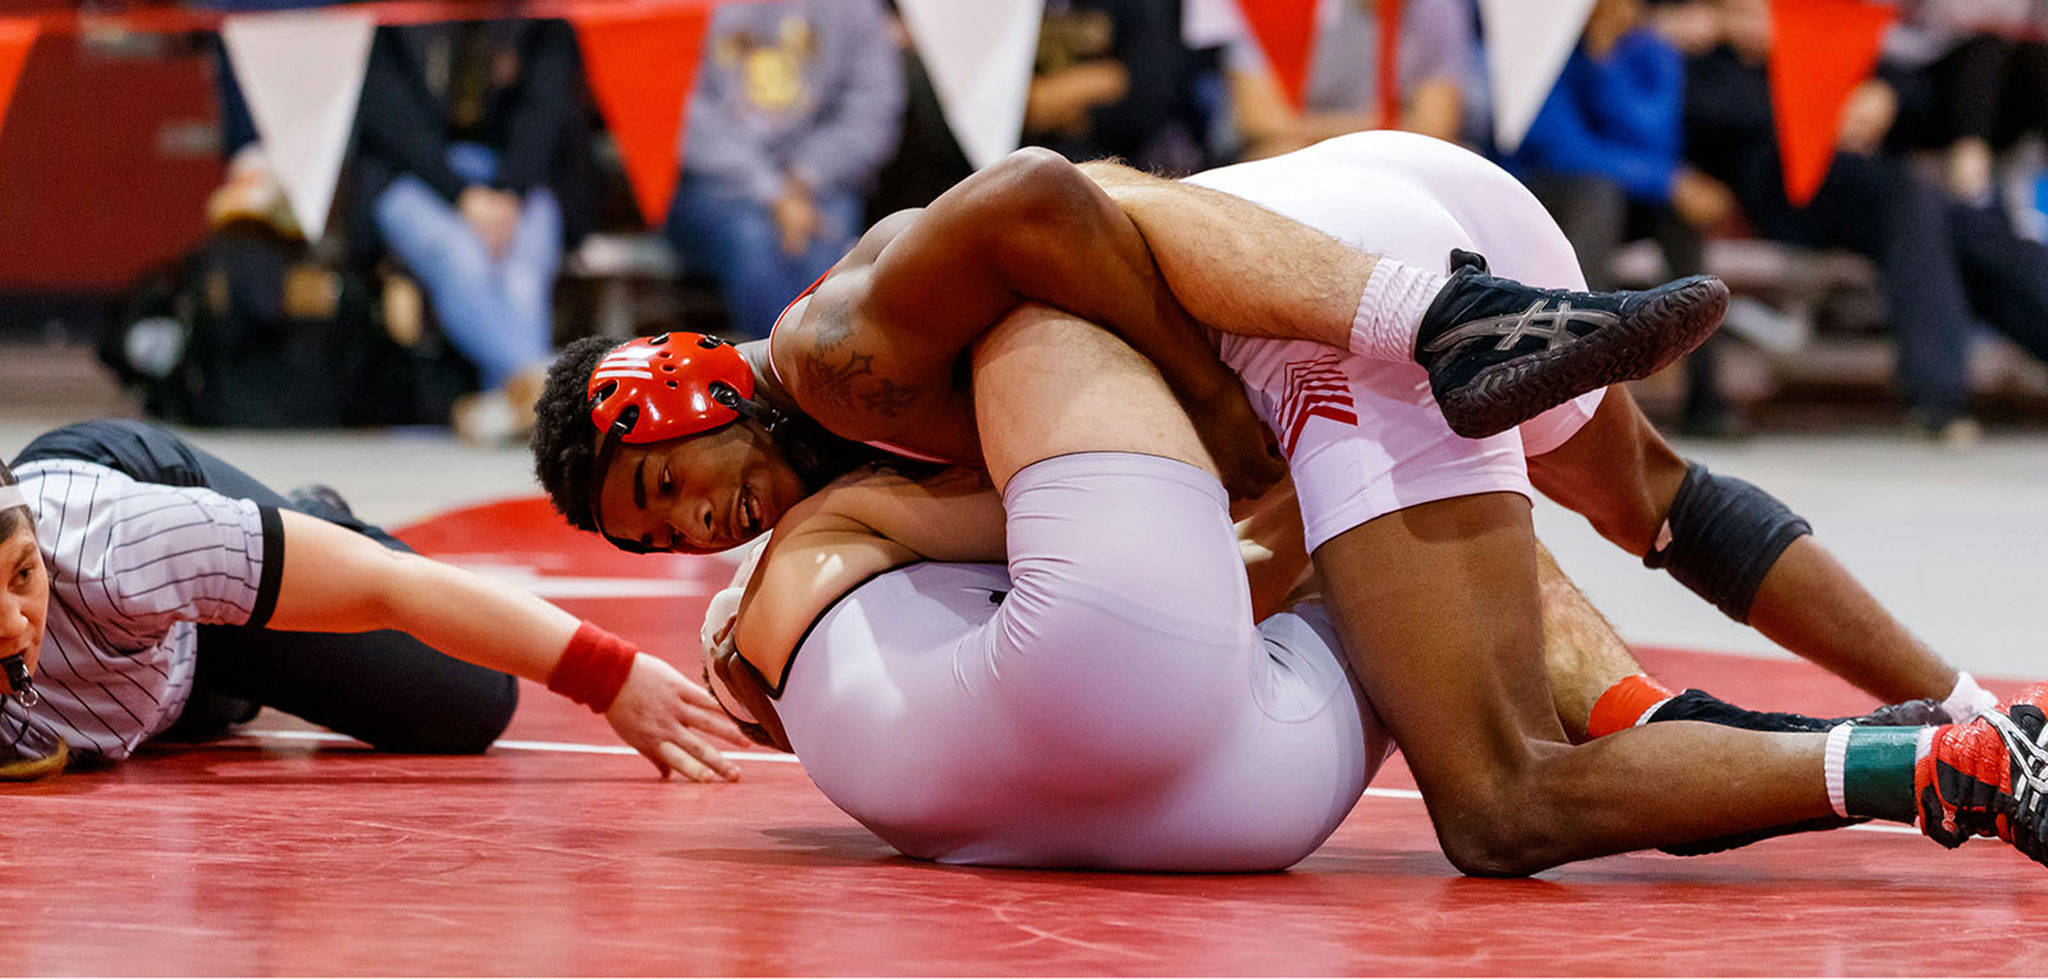 Oak Harbor graduate Jeremy Vester, top, goes for a pin this season while competing for Central College. (Photo by Dan L. Vanderbeek)